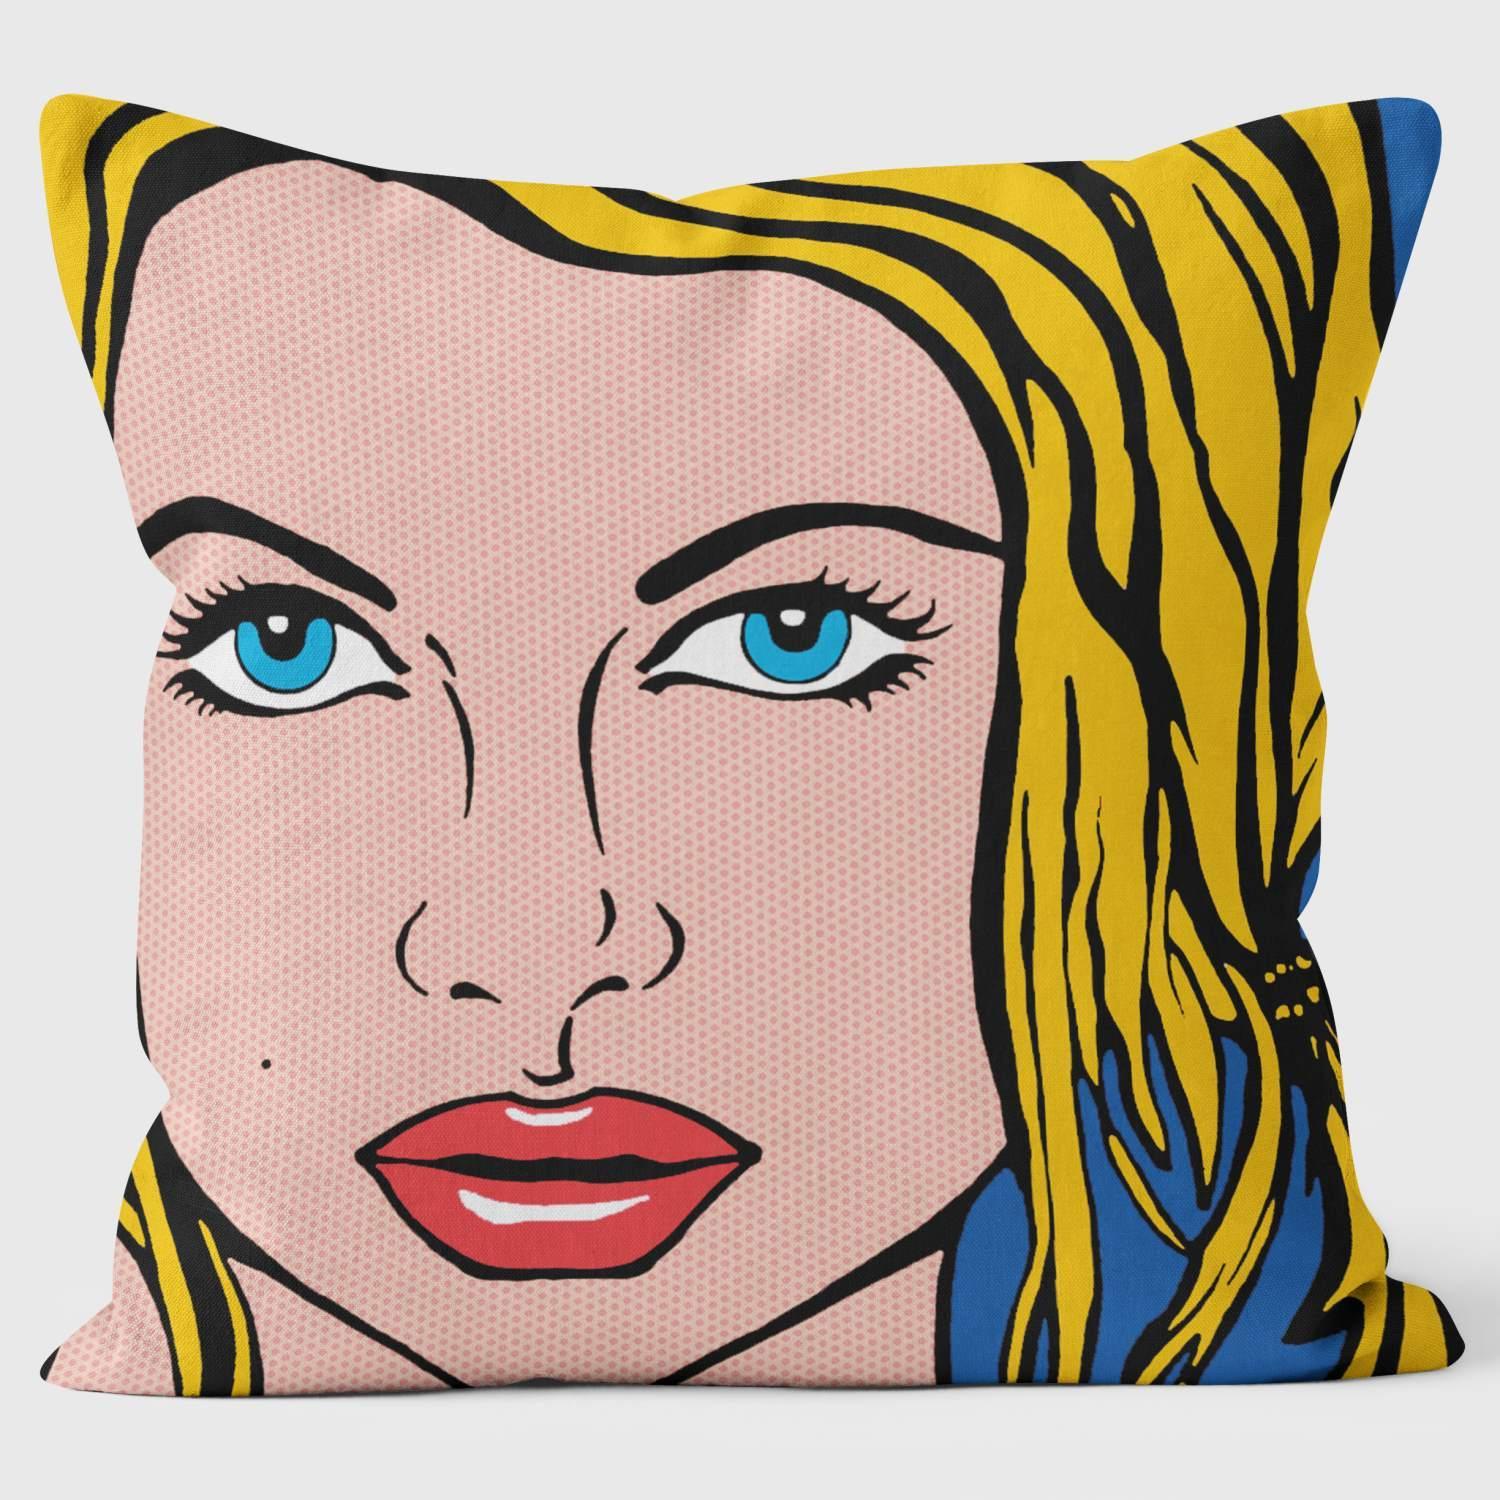 No Comment - Youngerman Art Cushions - Handmade Cushions UK - WeLoveCushions